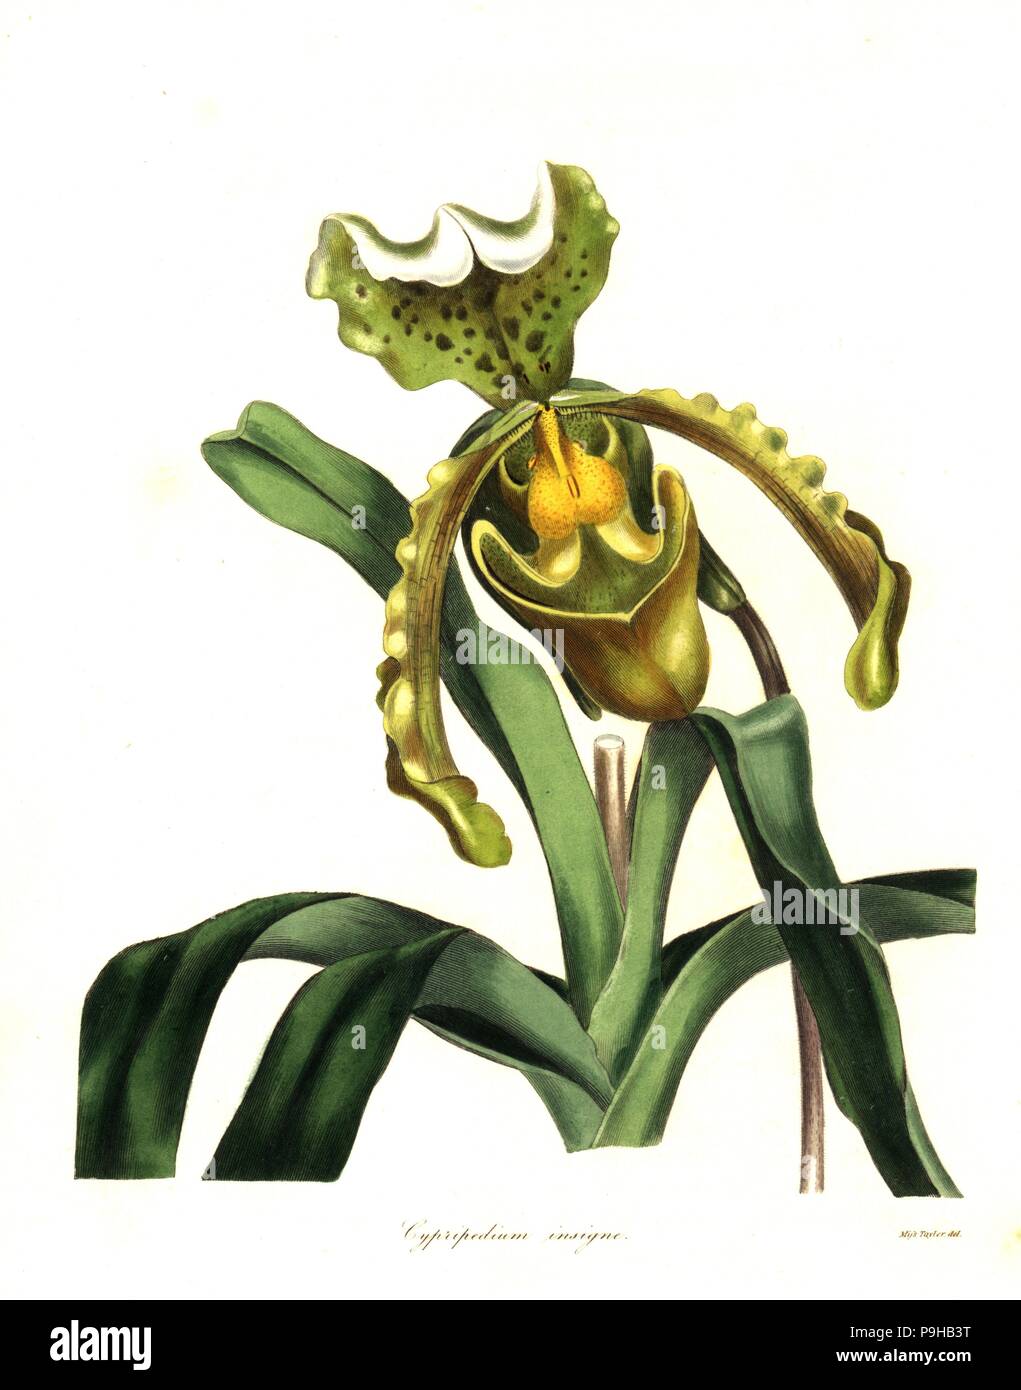 Paphiopedilum insigne orchid (Remarkable cypripedium, Cypripedium insigne). Handcoloured copperplate engraving after a botanical illustration by Miss Jane Taylor from Benjamin Maund and the Rev. John Stevens Henslow's The Botanist, London, 1836. Stock Photo